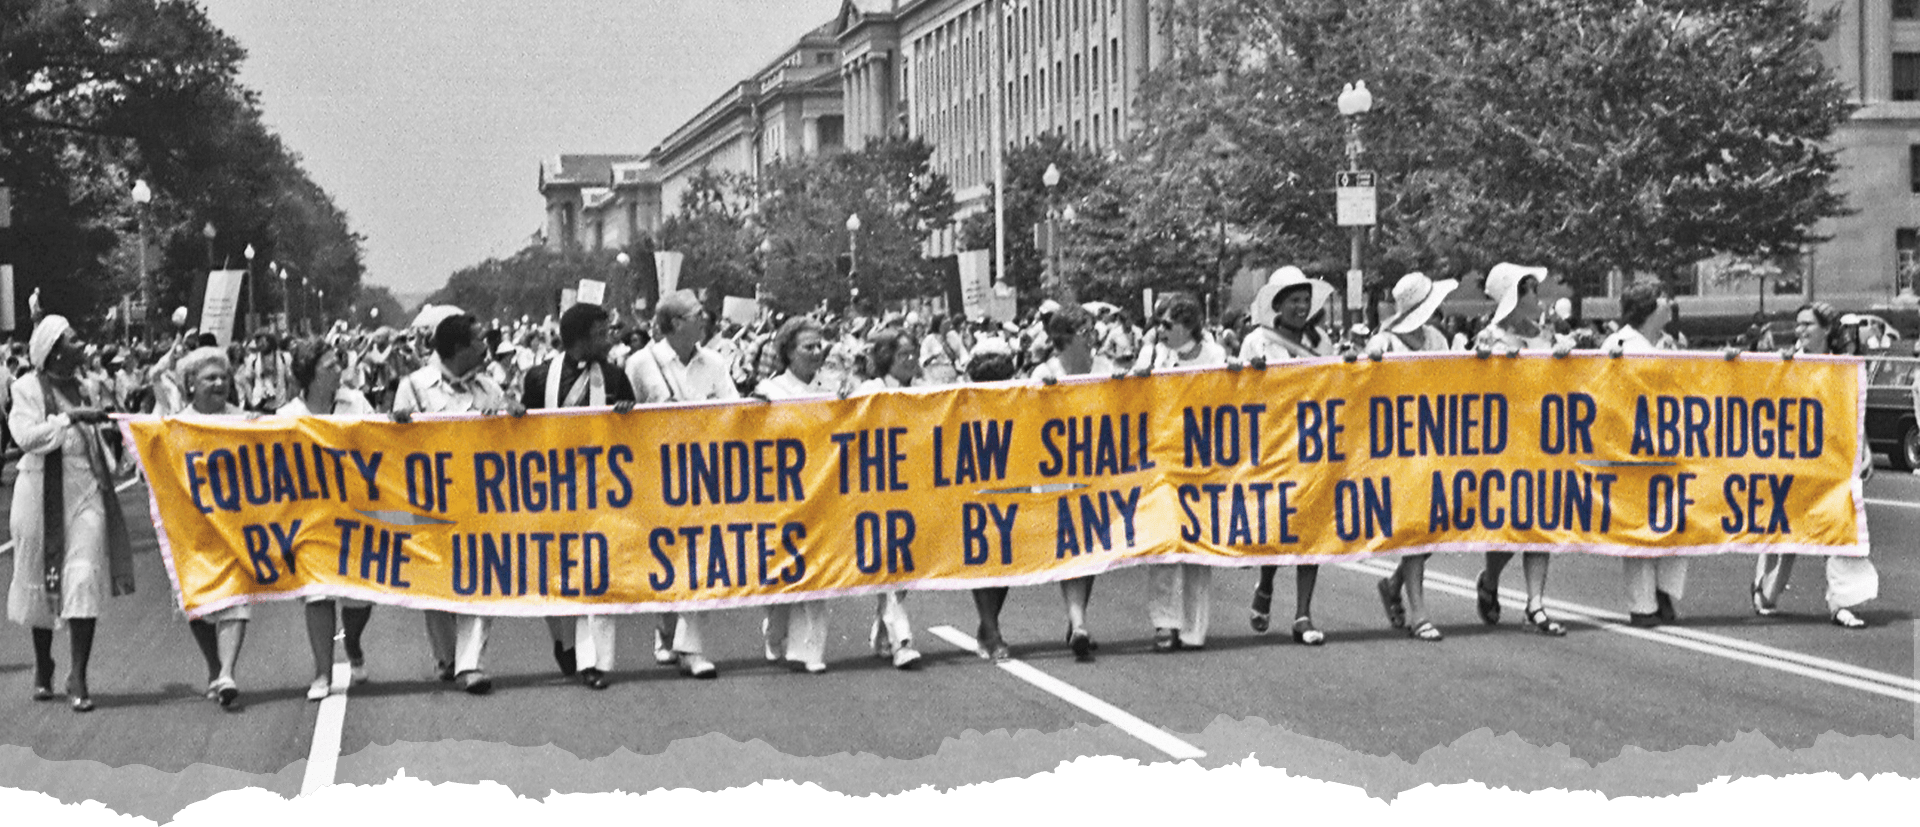 Image of marchers carrying a banner that reads: Equality of Rights Under the Law Shall Not Be Denied or Abridged by the United States or by Any State on Account of Sex